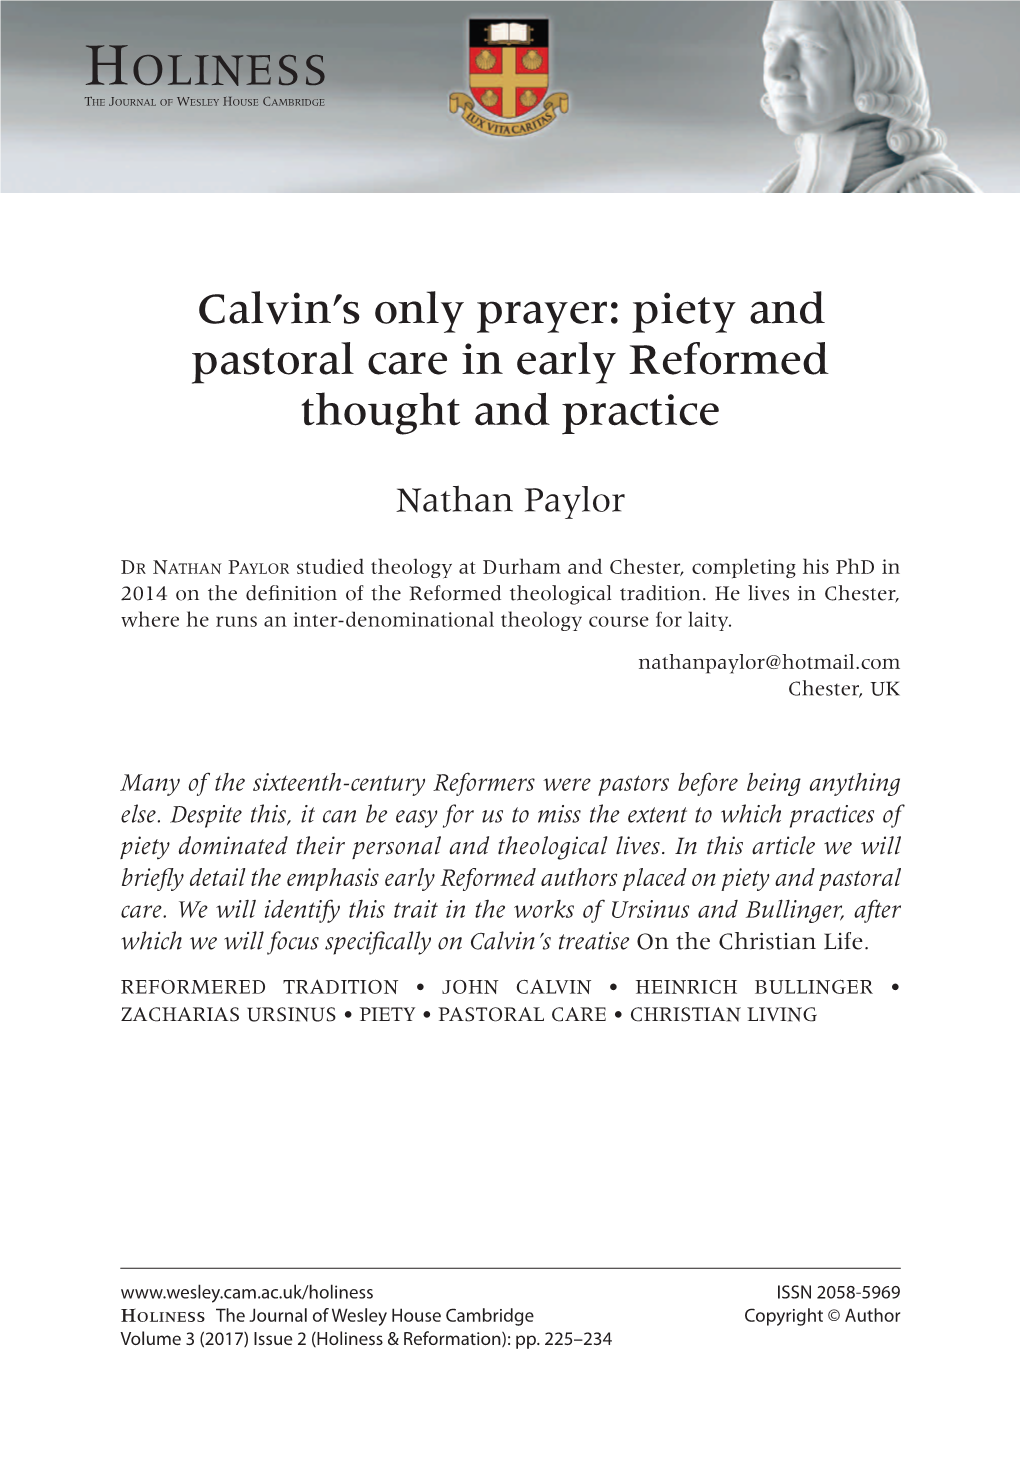 Calvin's Only Prayer: Piety and Pastoral Care in Early Reformed